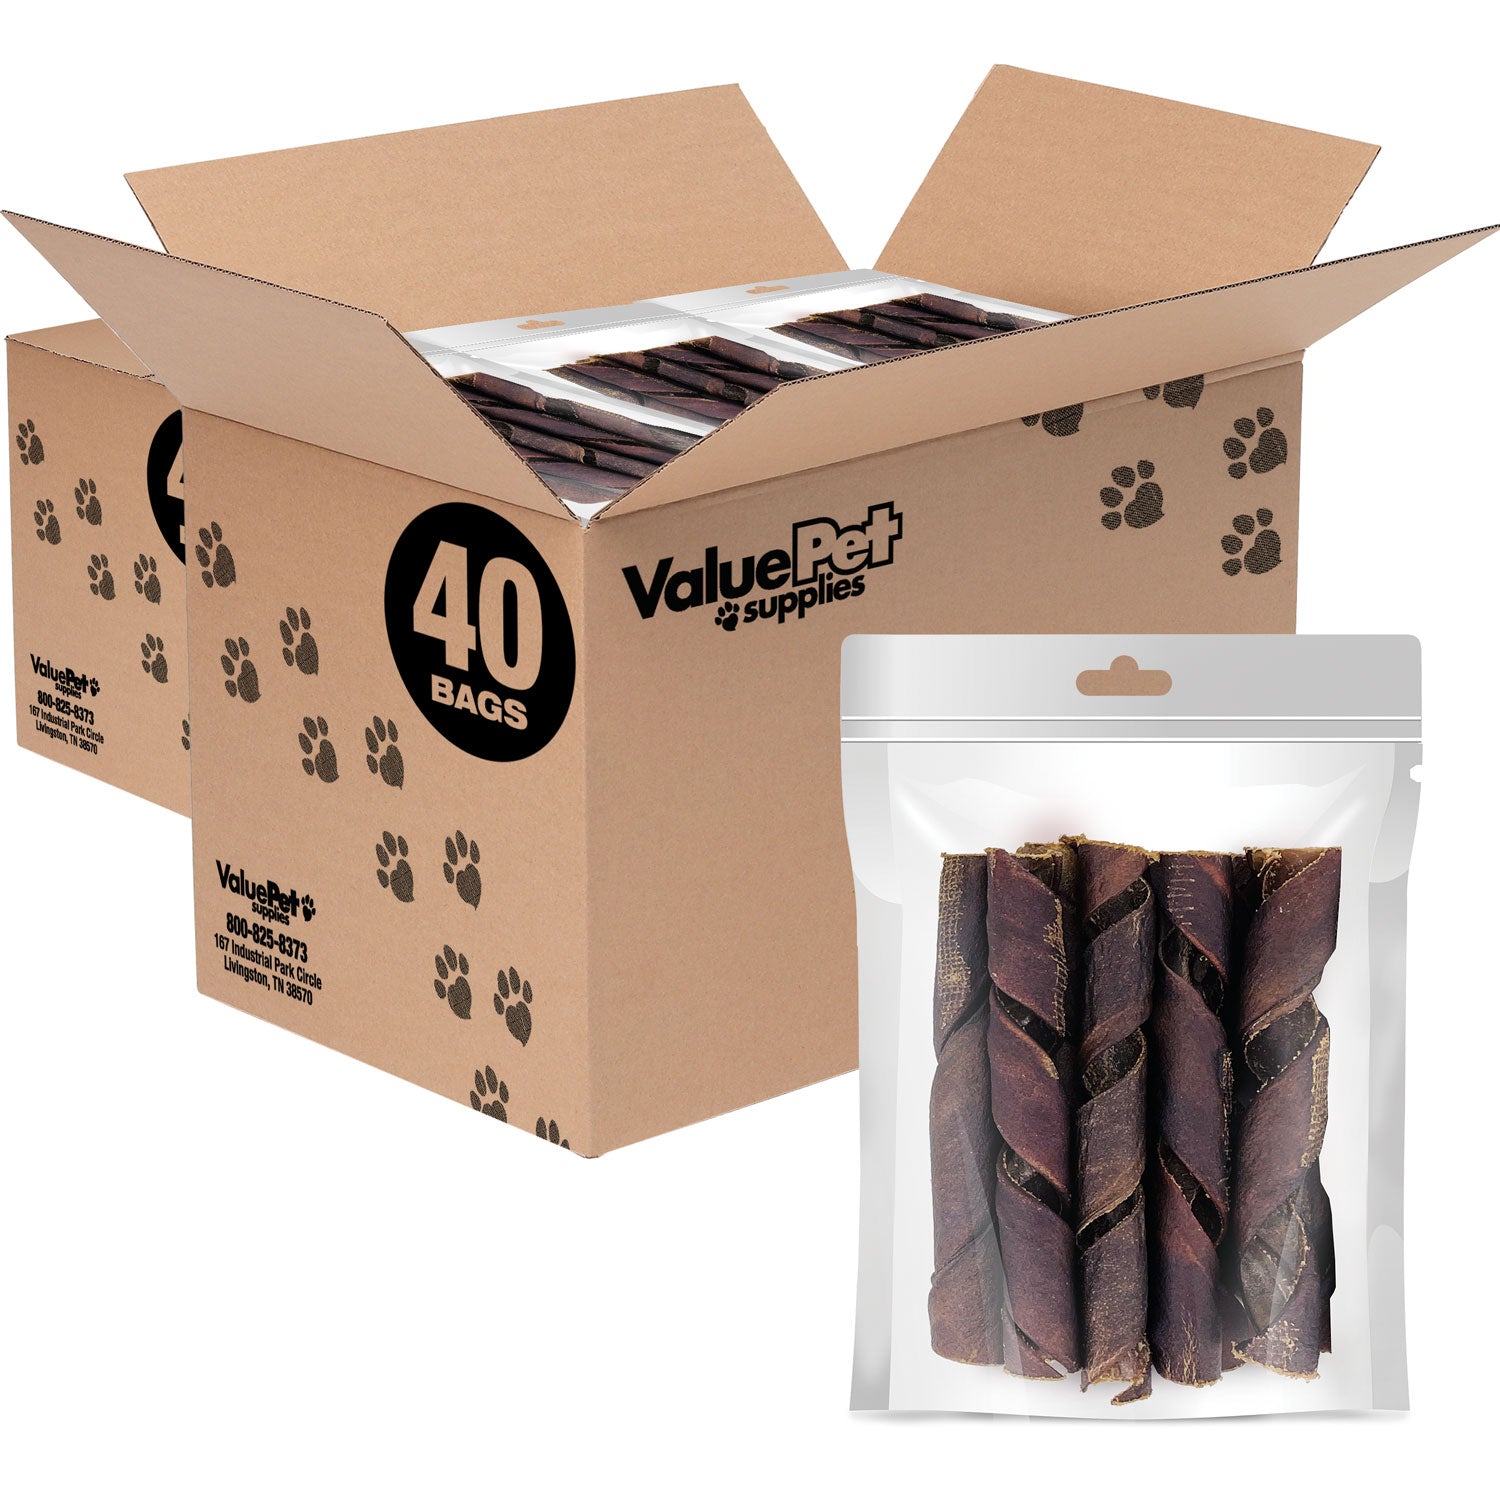 ValueBull USA Collagen Sticks For Small Dogs, Smoked, Thin Spirals, 5-6 Inch, 400 Count RESALE PACKS (80 x 5 Count)